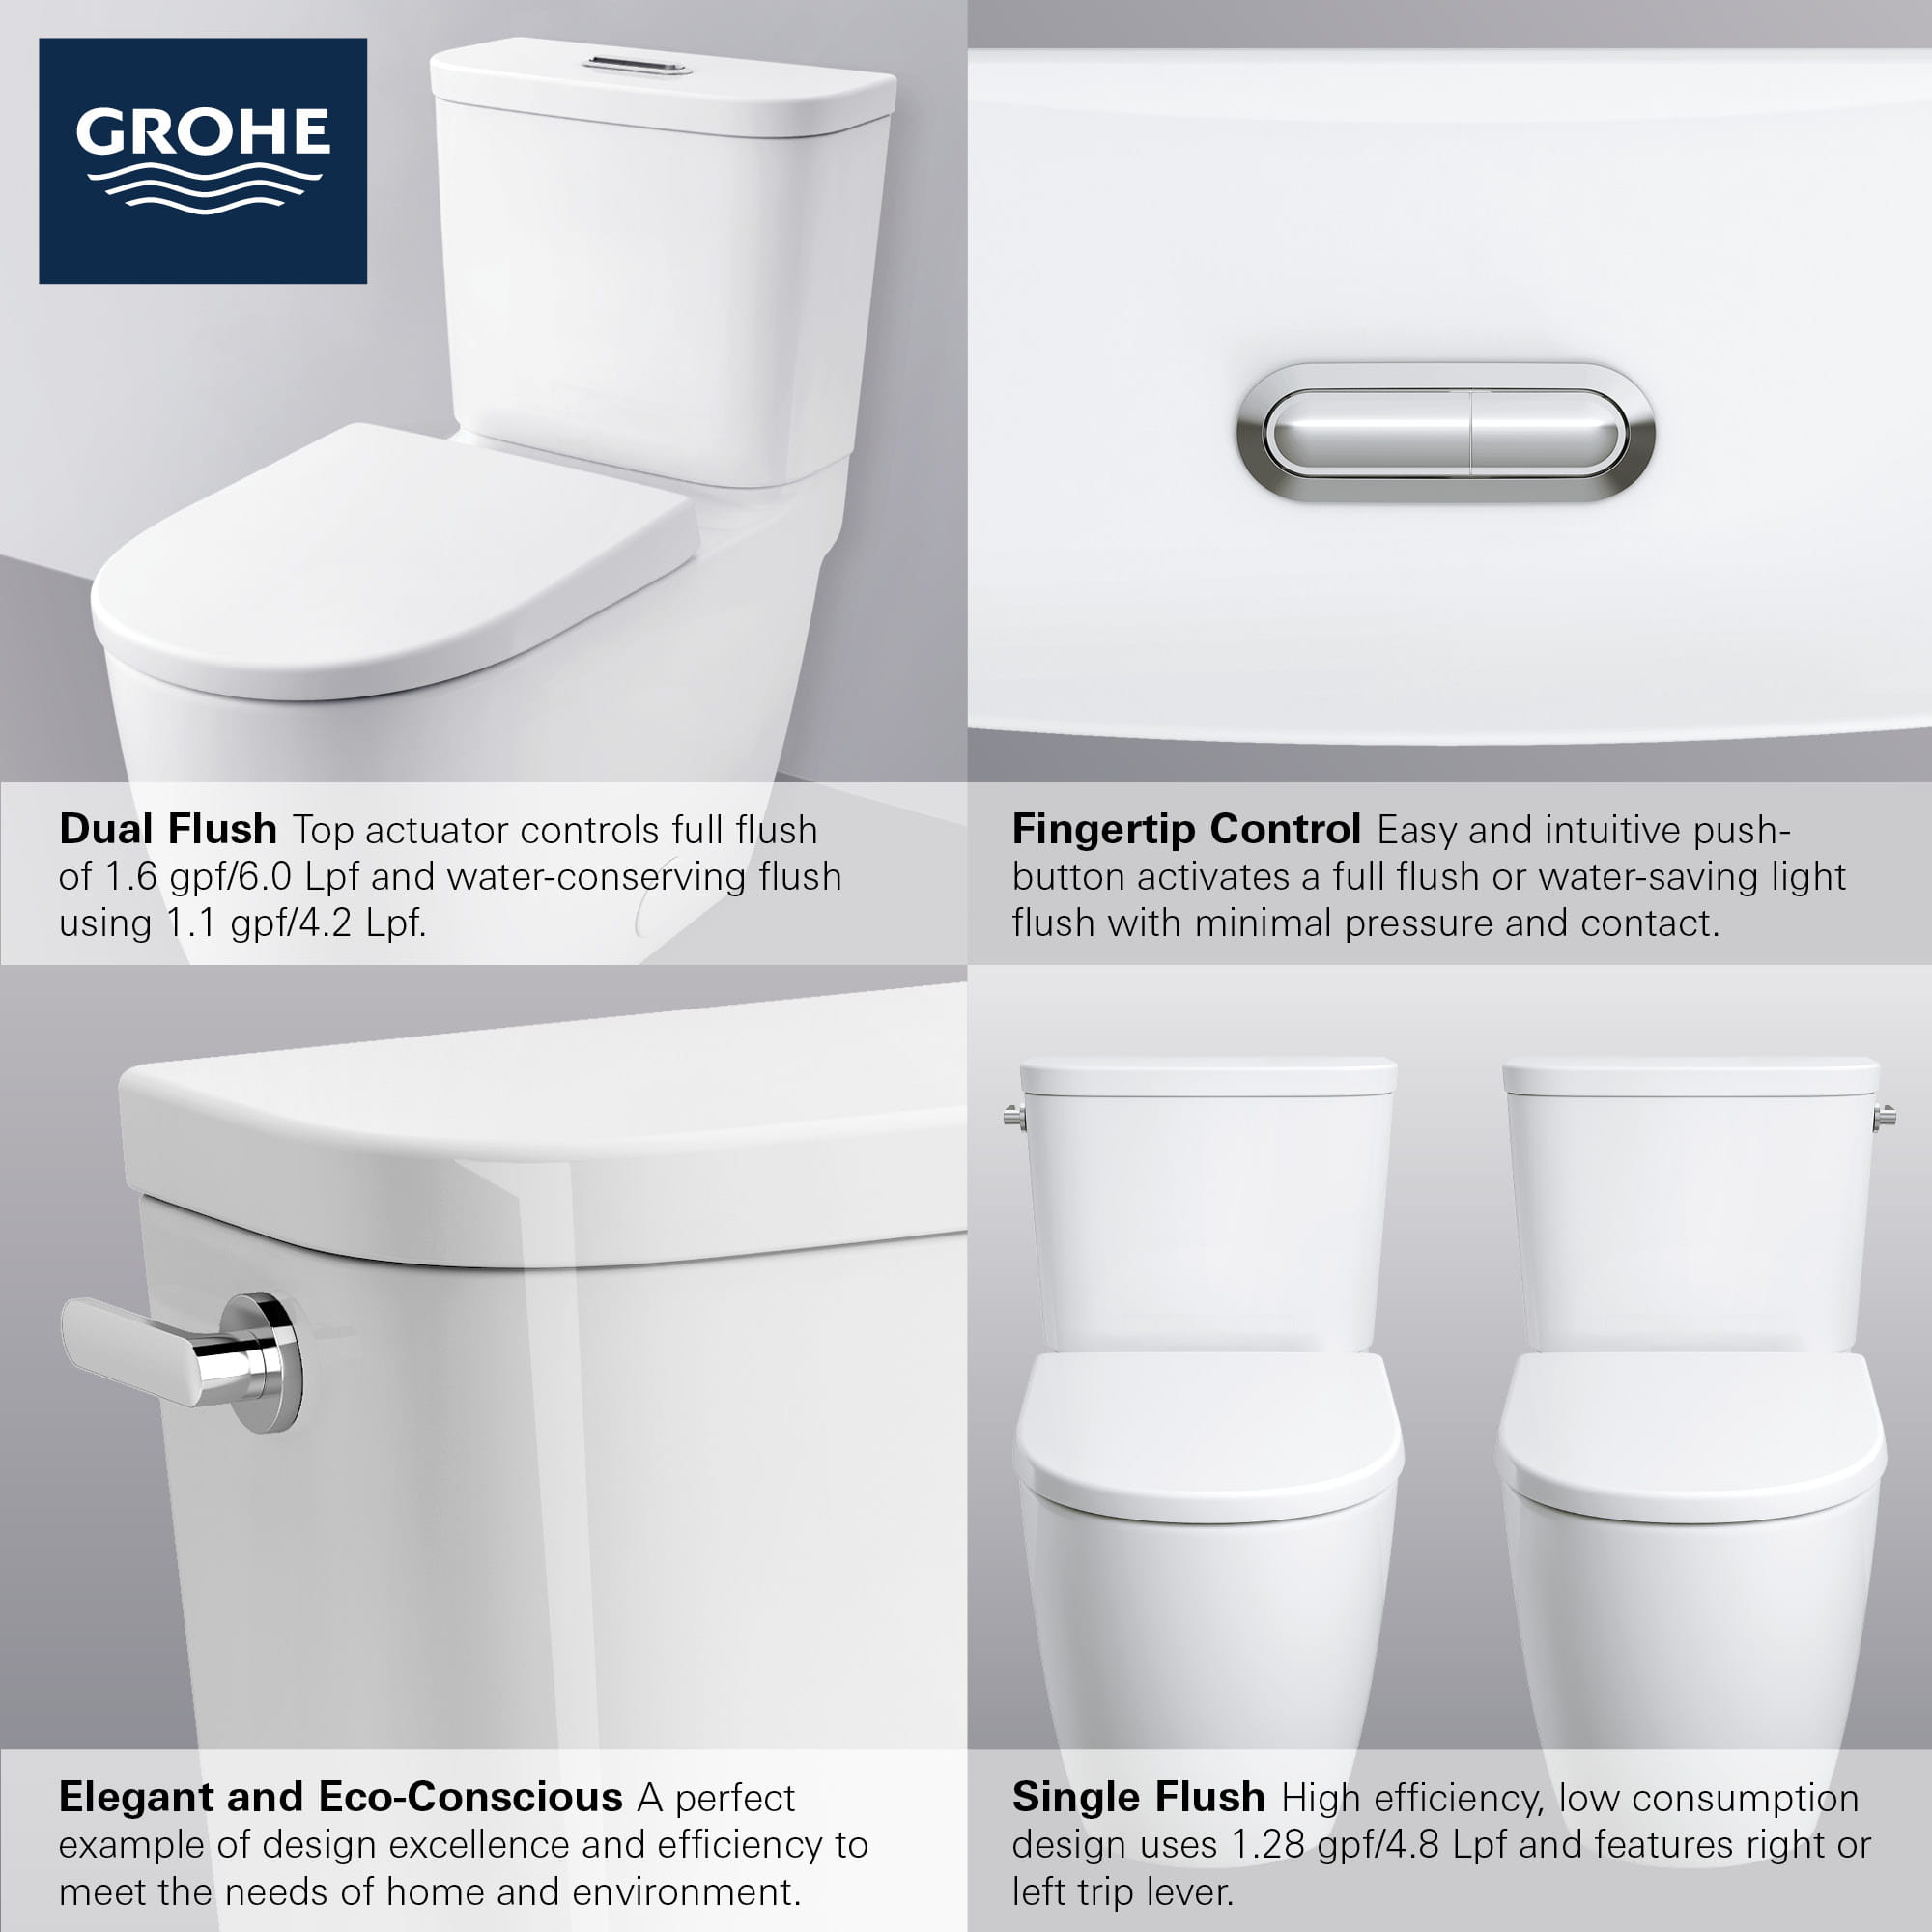 Essence 2 piece 128 GPF Right Hand Trip Lever Right height Elongated Toilet GROHE ALPINE WHITE